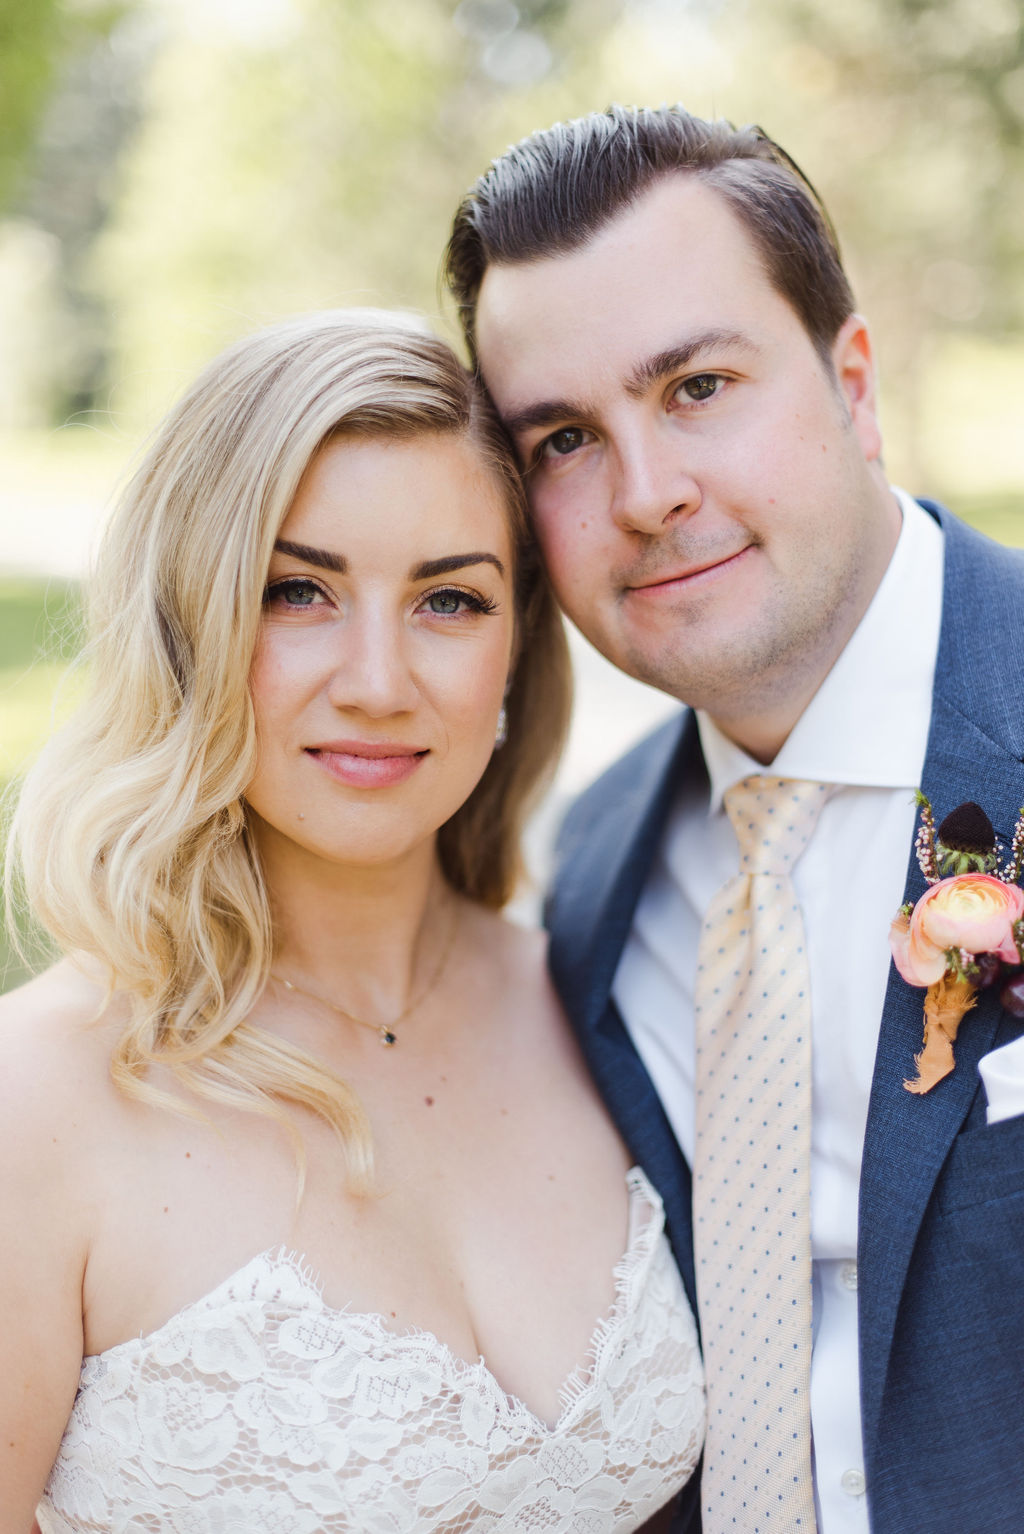 A portrait of a Calgary bride and groom with their heads close together on their wedding day